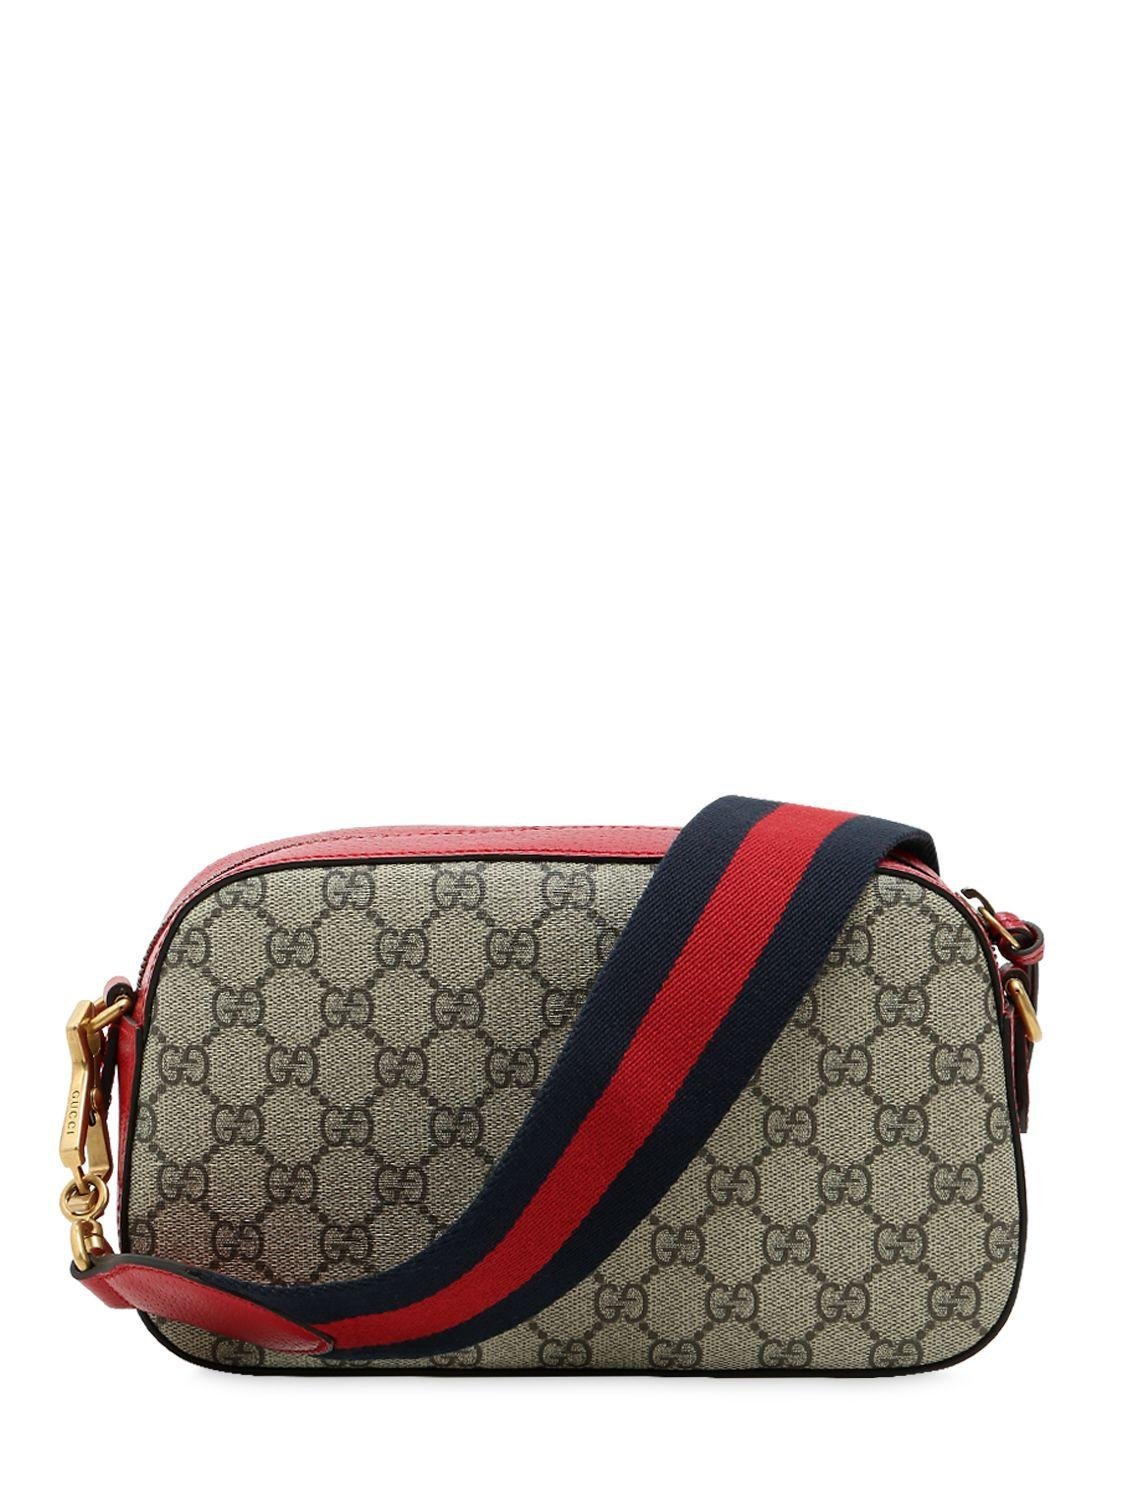 Gucci Gg Supreme Neo Vintage Camera Bag in Red - Lyst